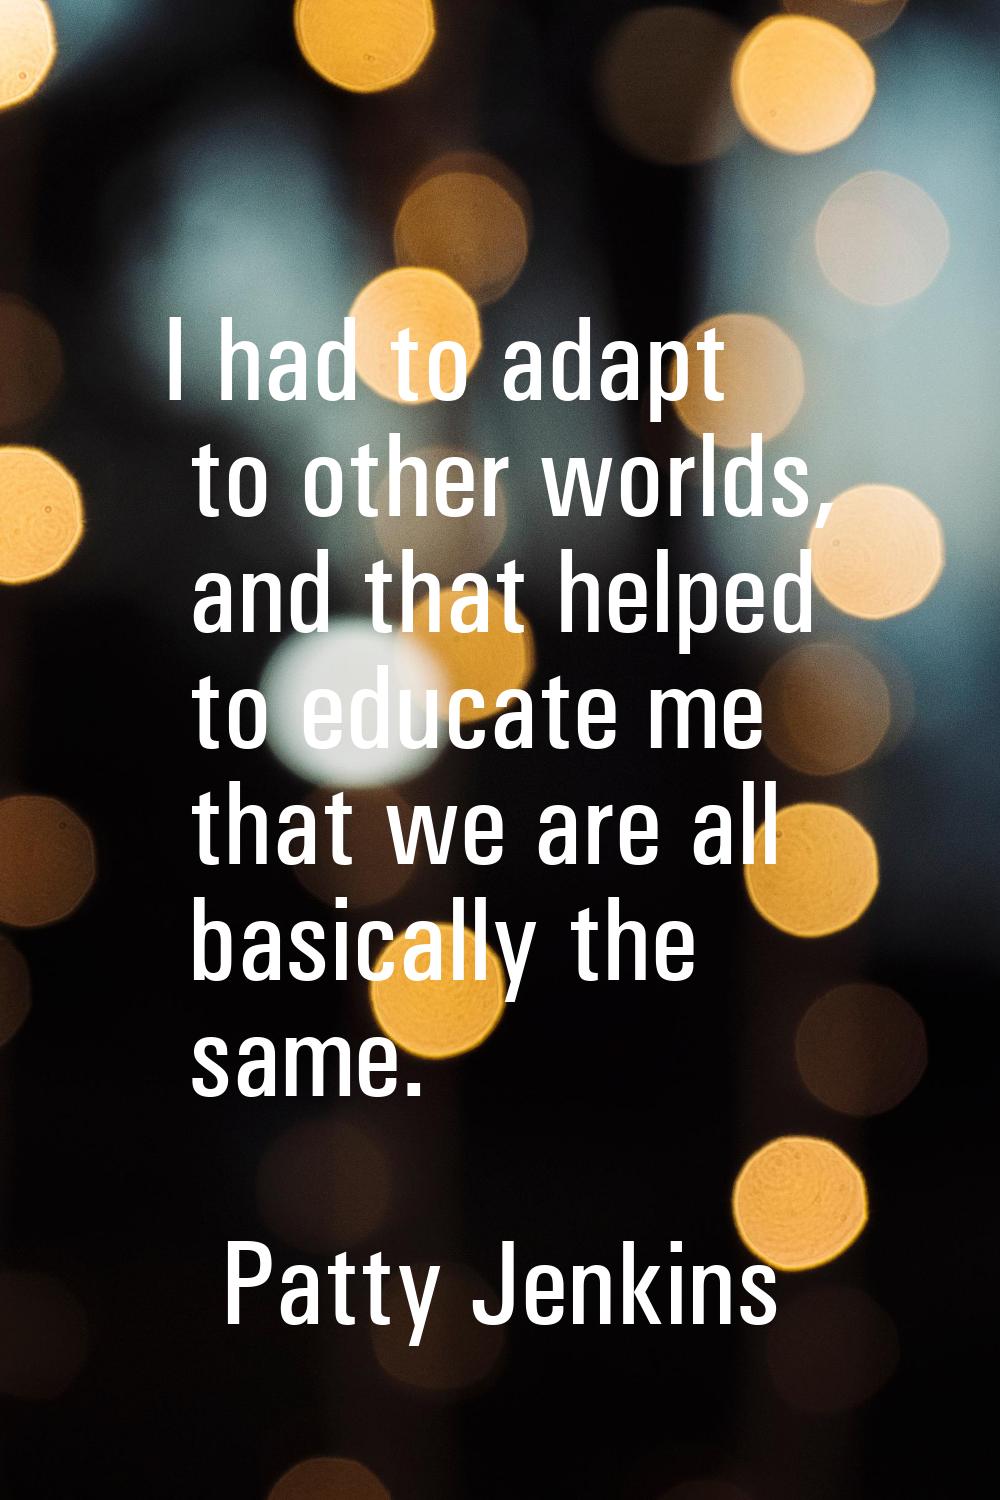 I had to adapt to other worlds, and that helped to educate me that we are all basically the same.